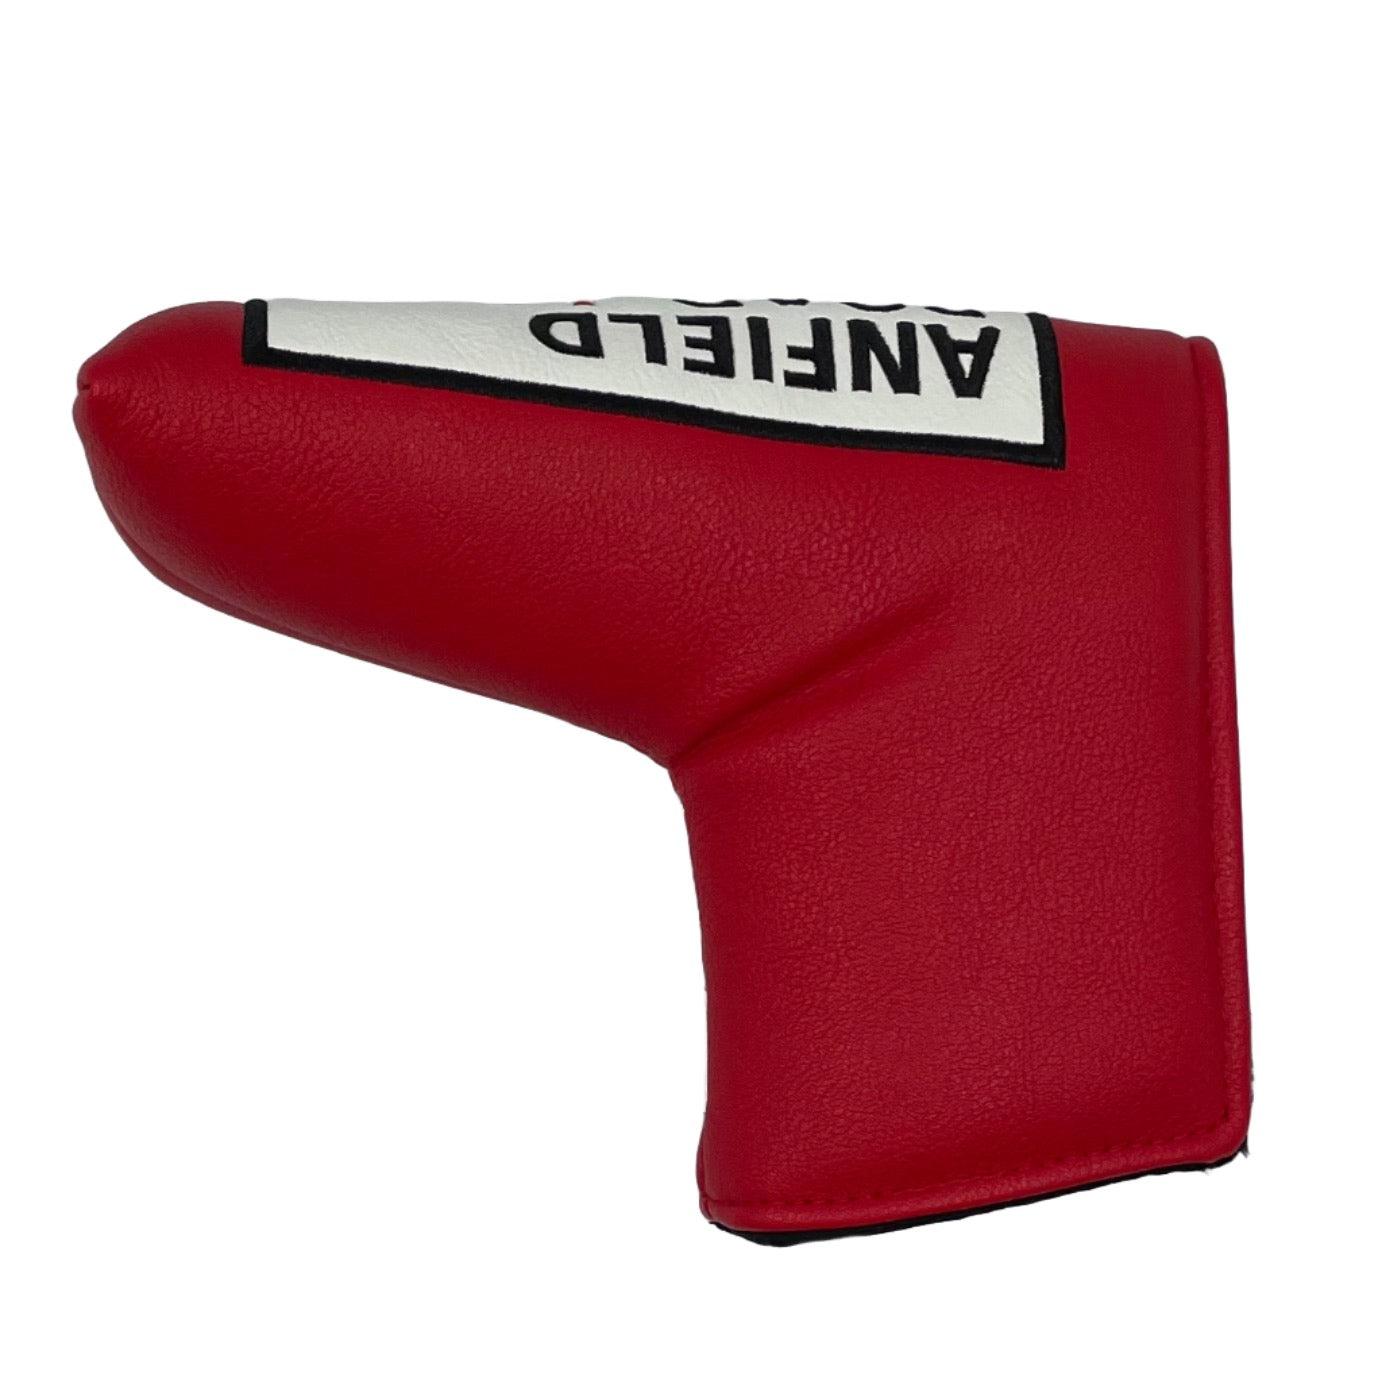 Liverpool (Anfield) Blade Putter Cover